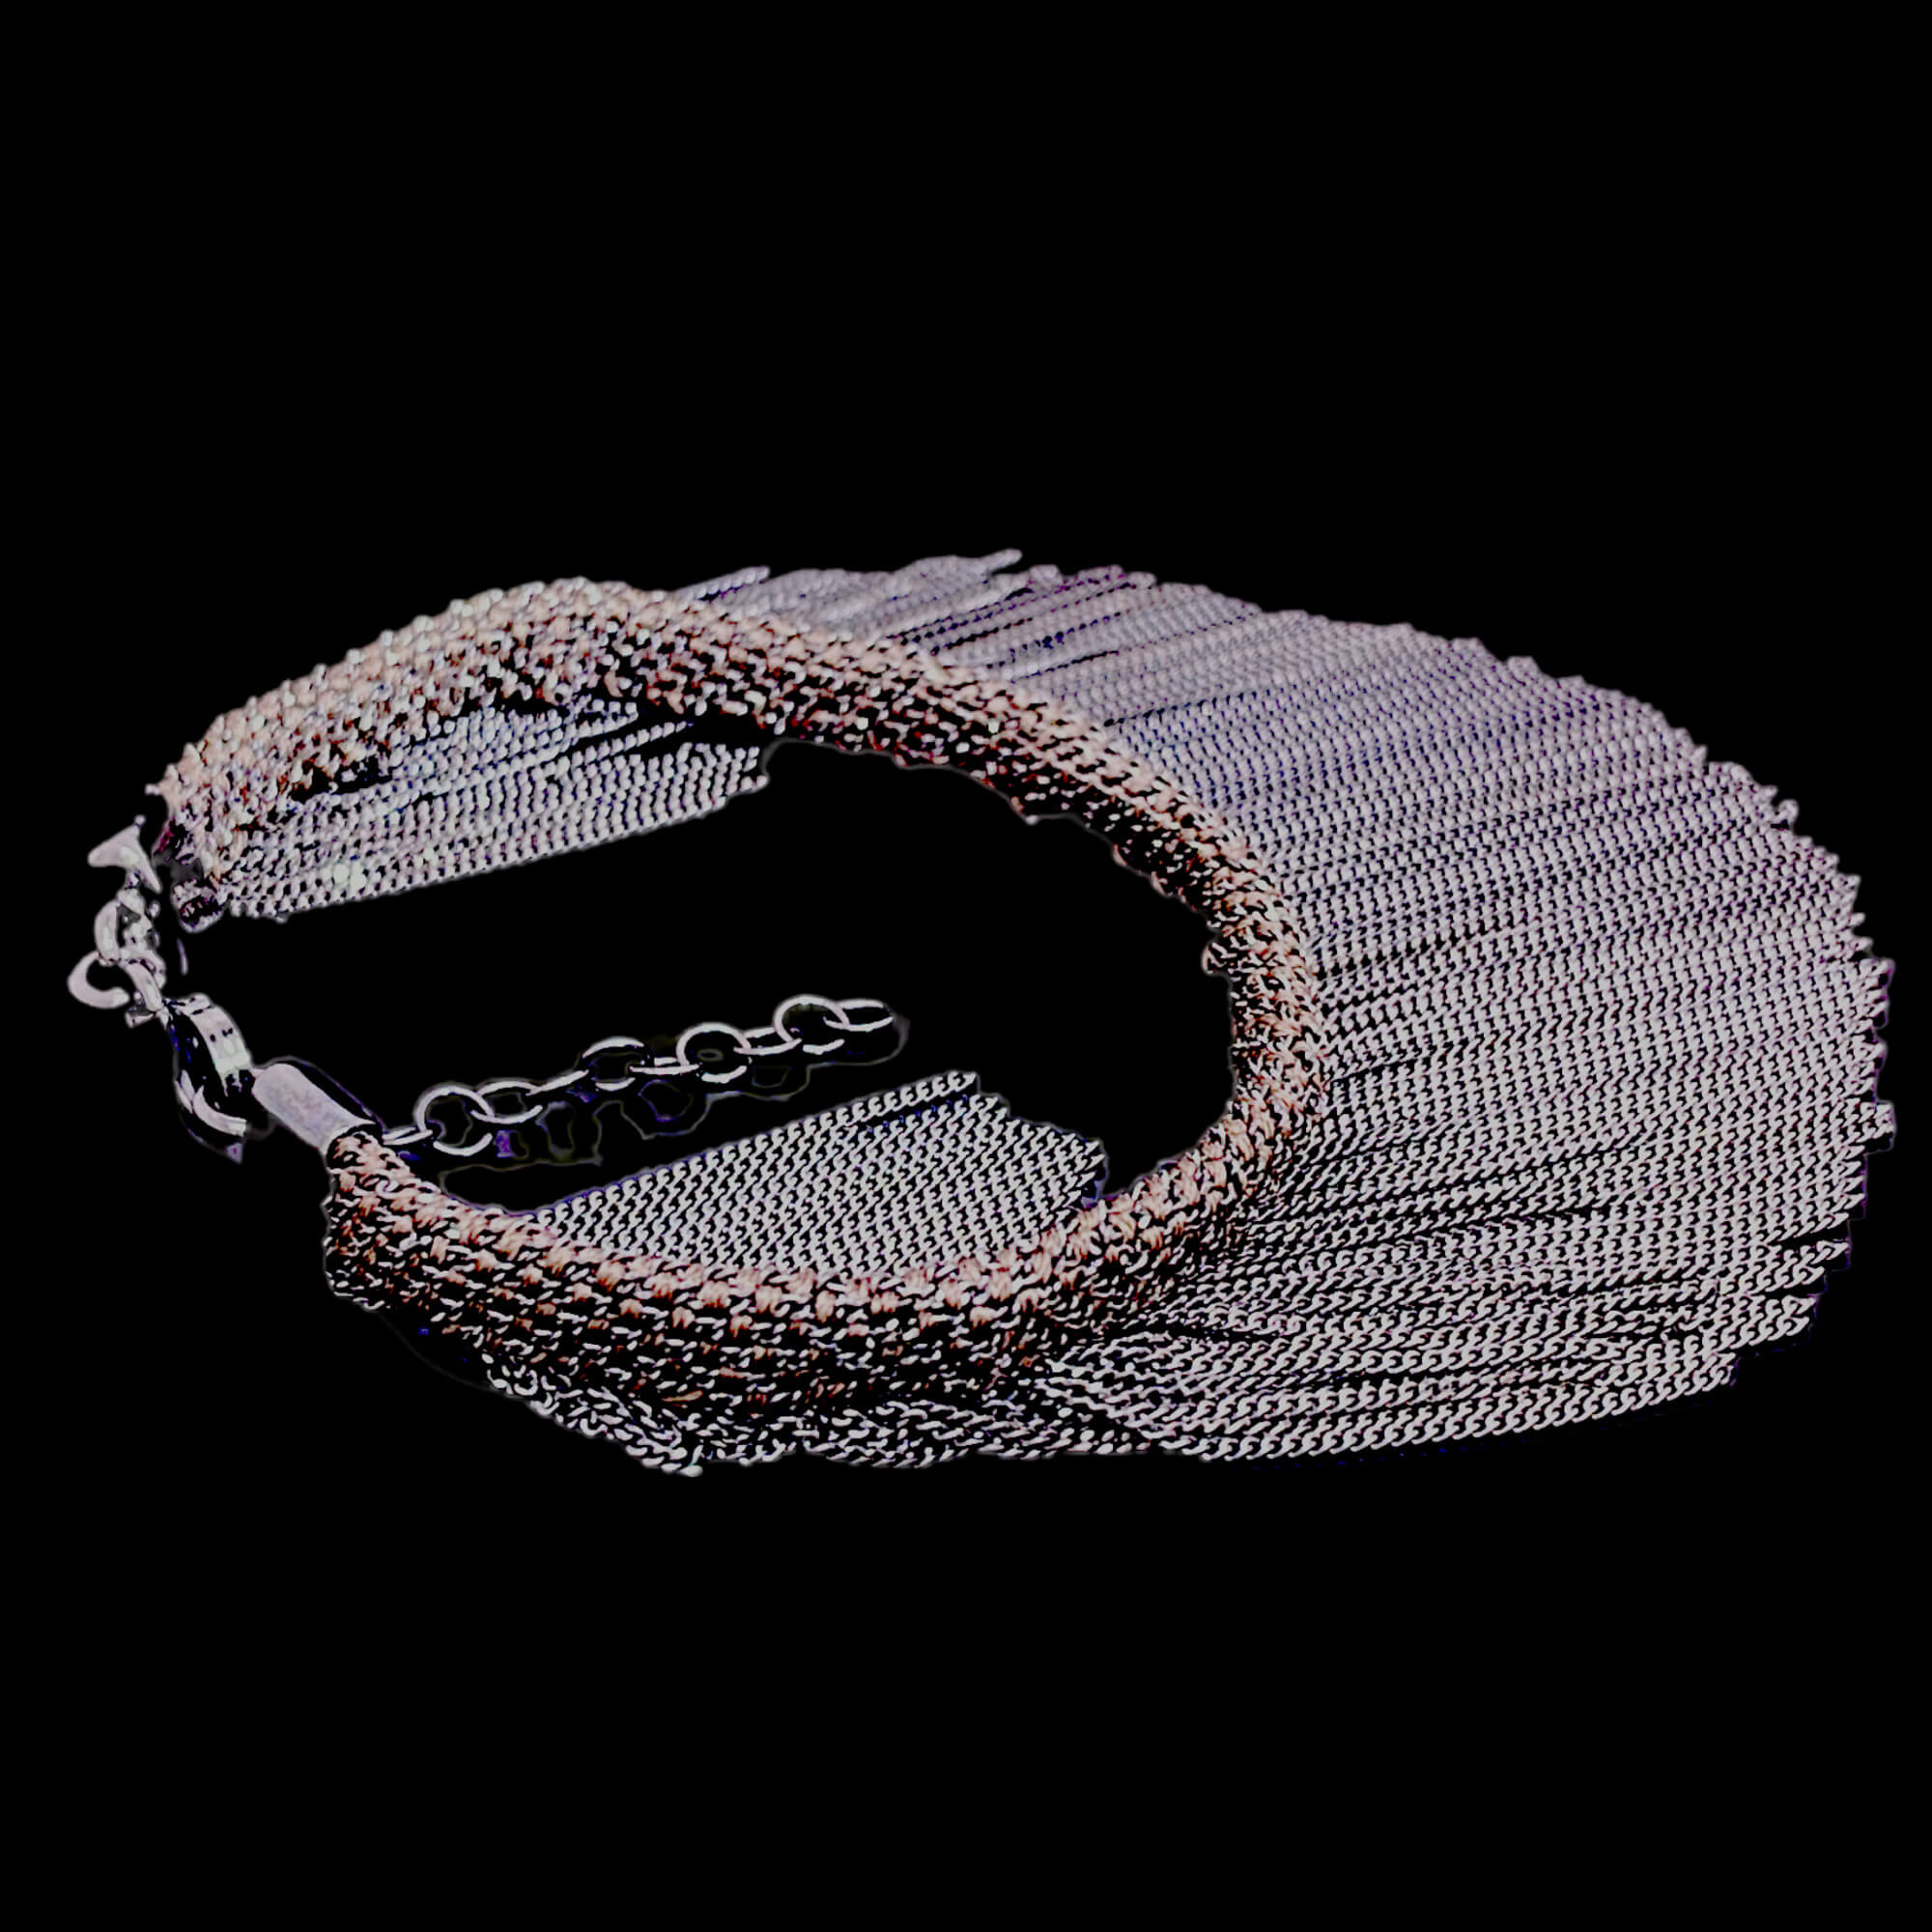 Brown and gray-colored bracelet with hanging chains